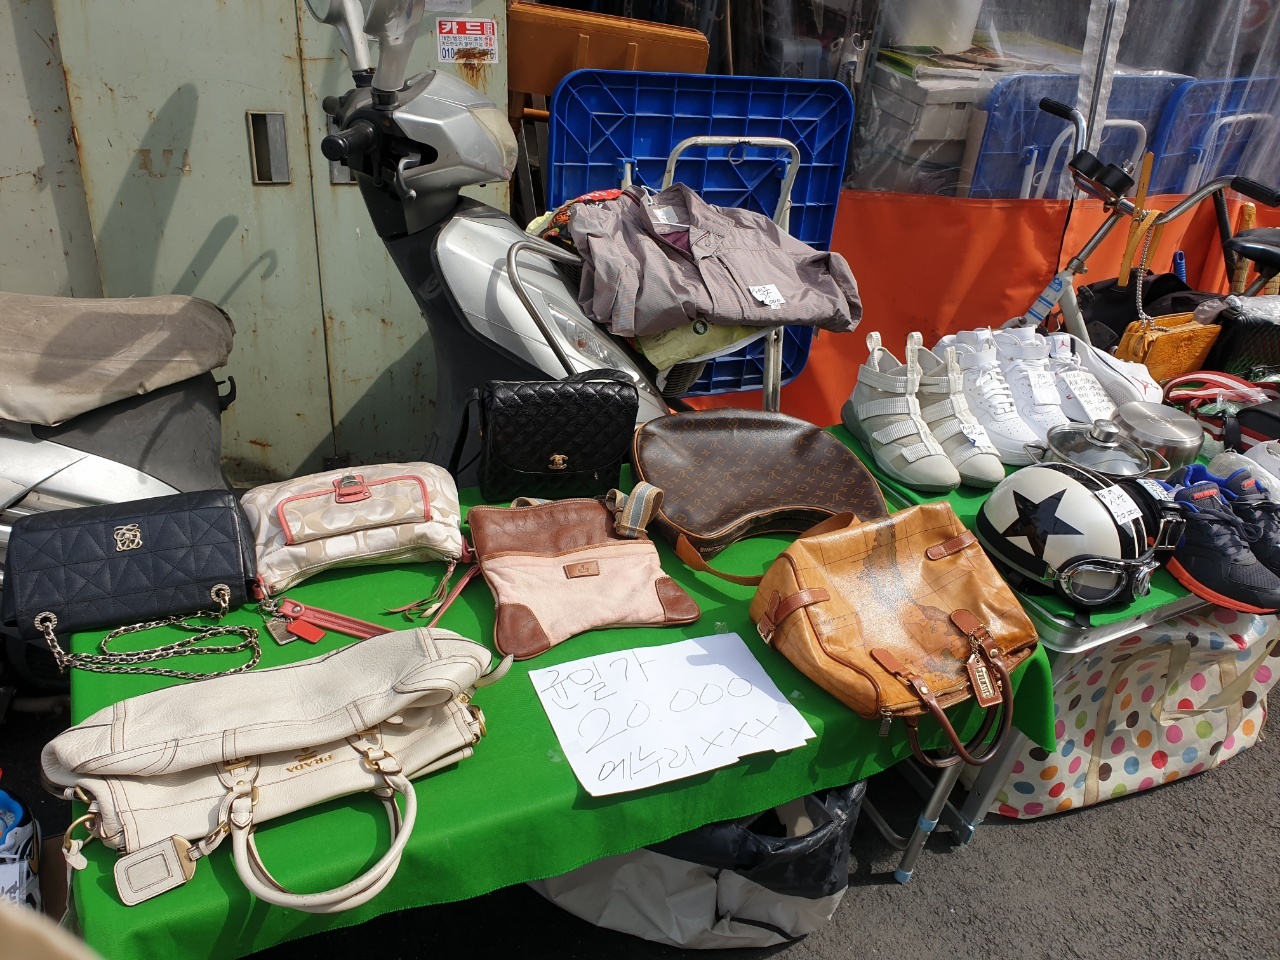 Chanel handbags and other luxury items are priced 20,000 won each at a vintage shop on the street. (Choi Jae-hee / The Korea Herald)